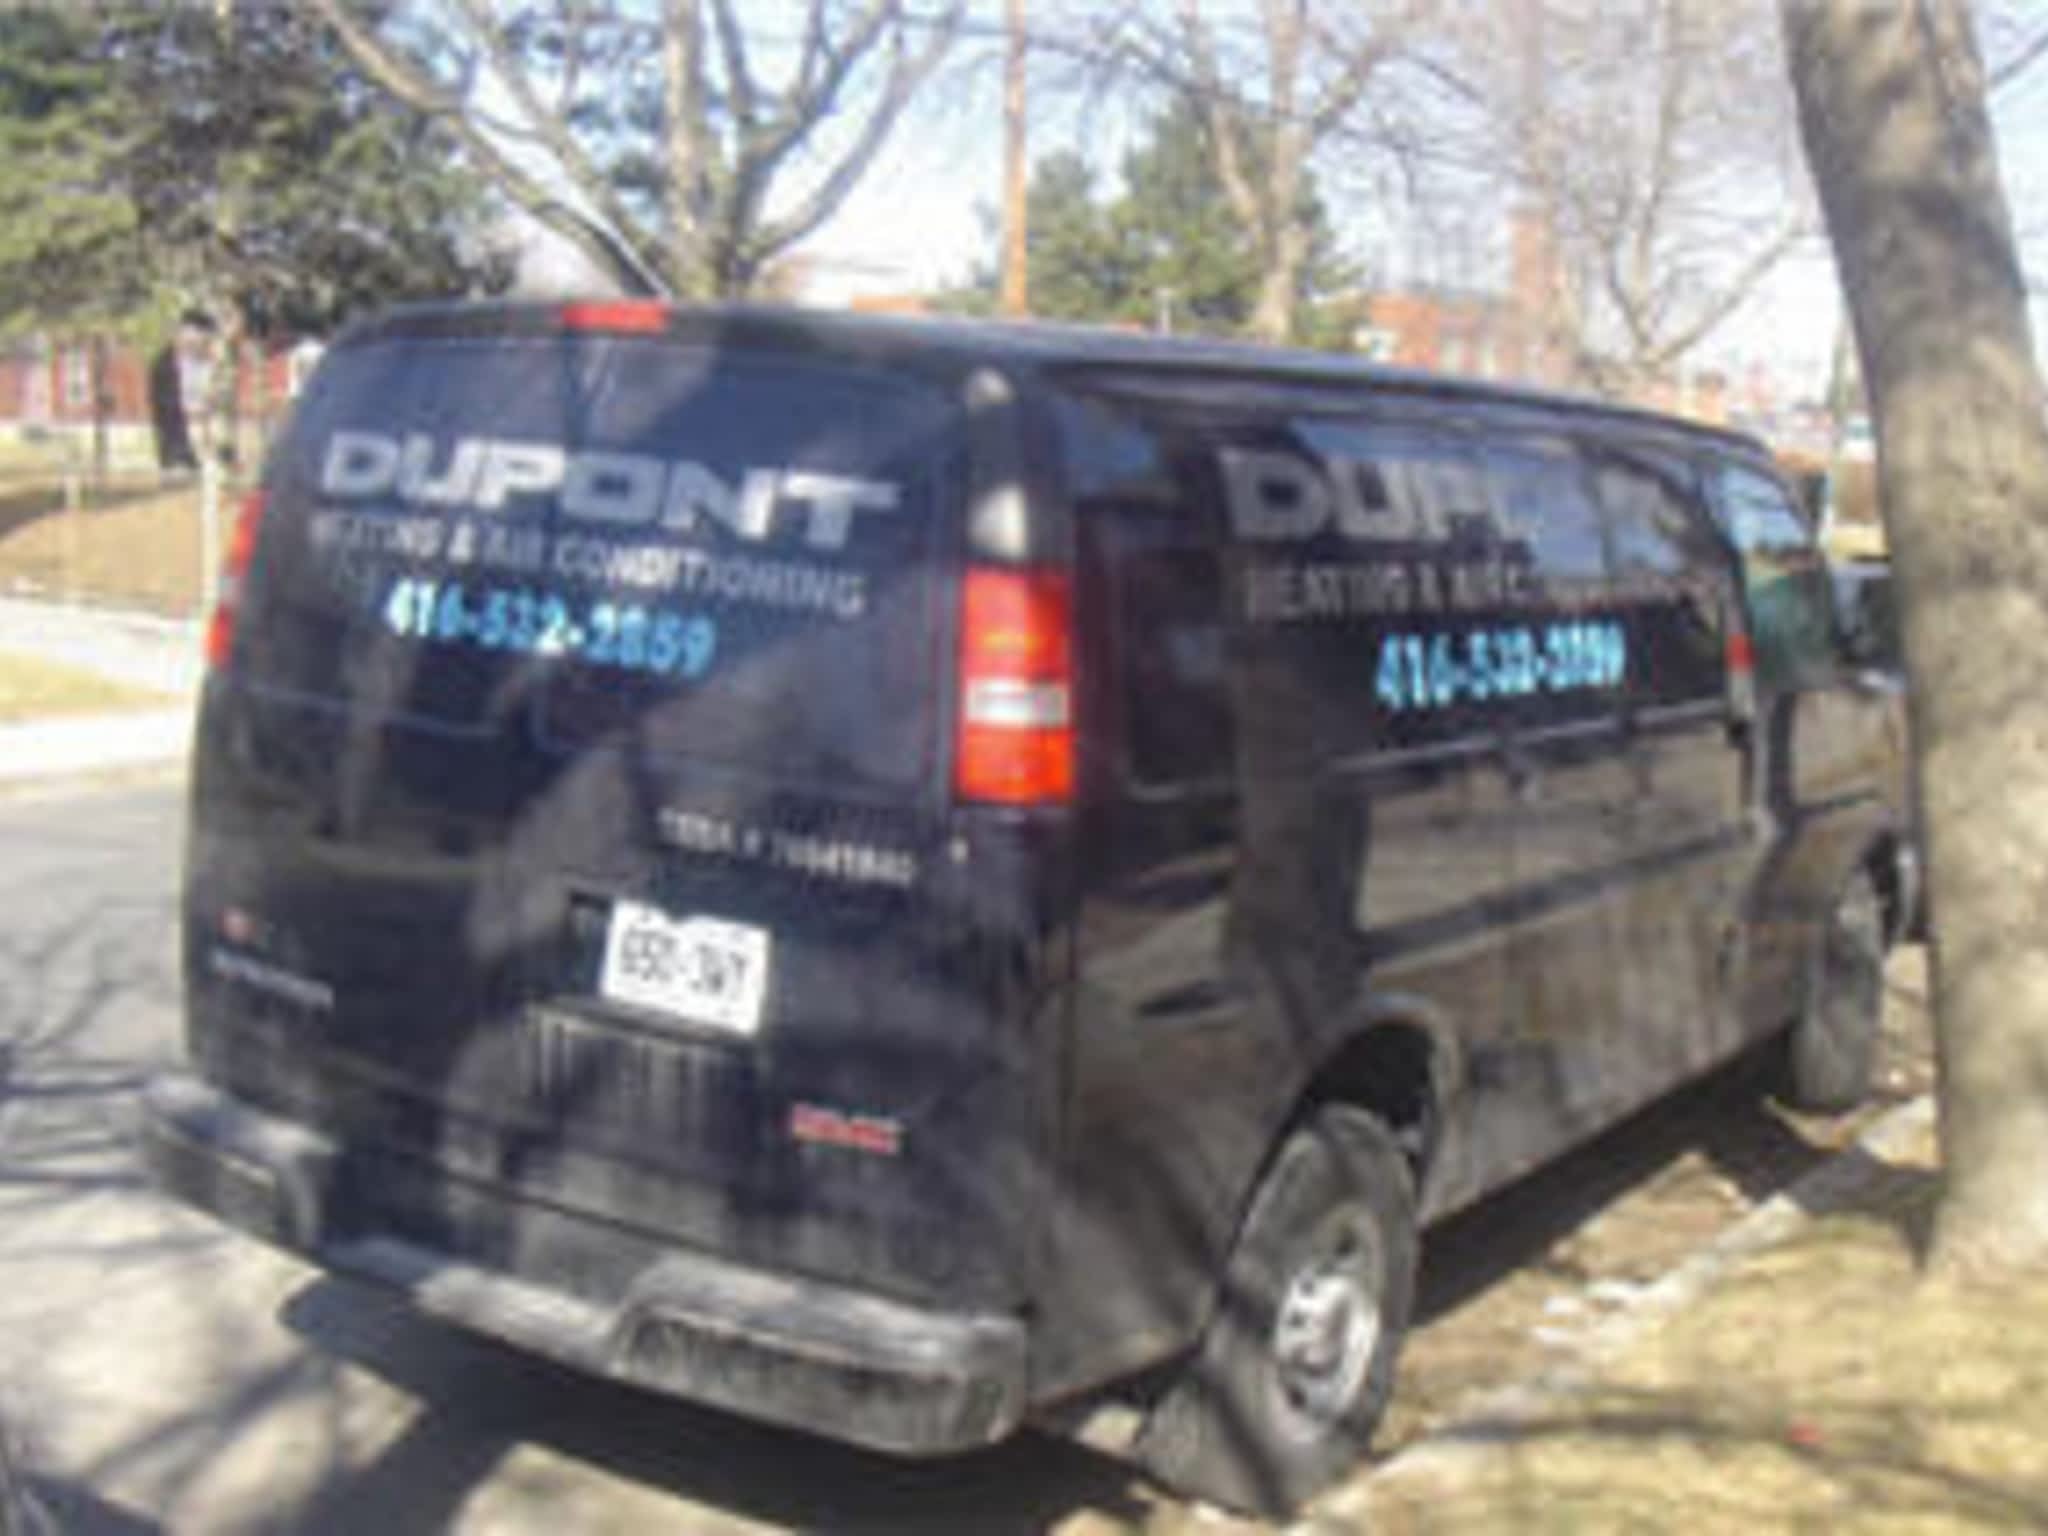 photo Dupont Heating & Air Conditionning Ltd